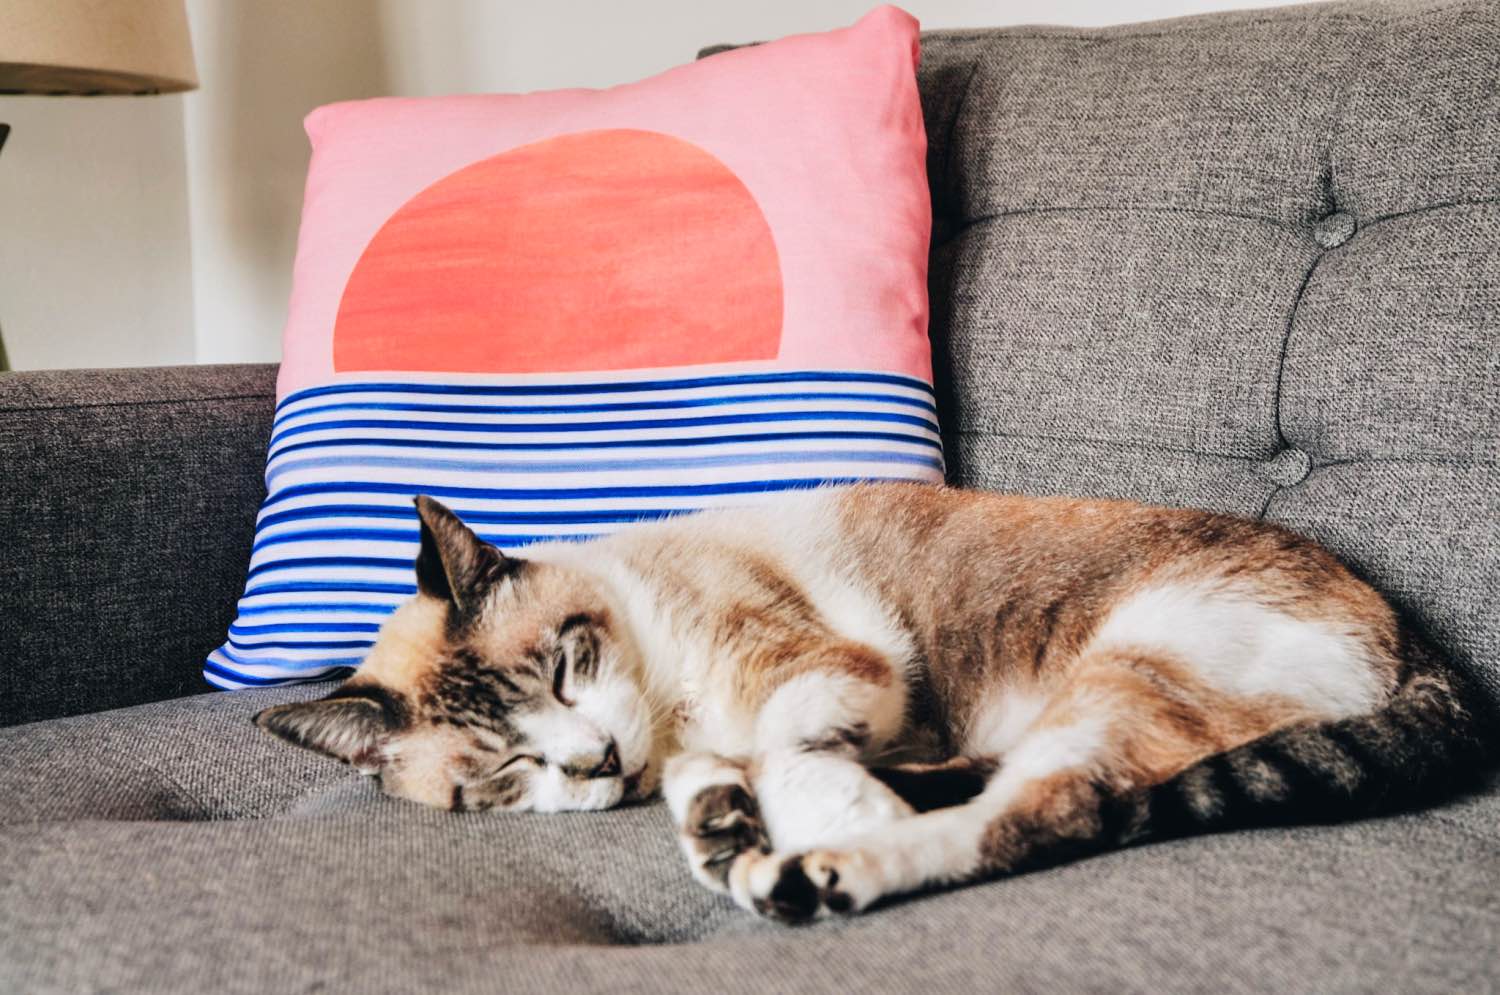 handsome the cat sleeping with a society6 pillow